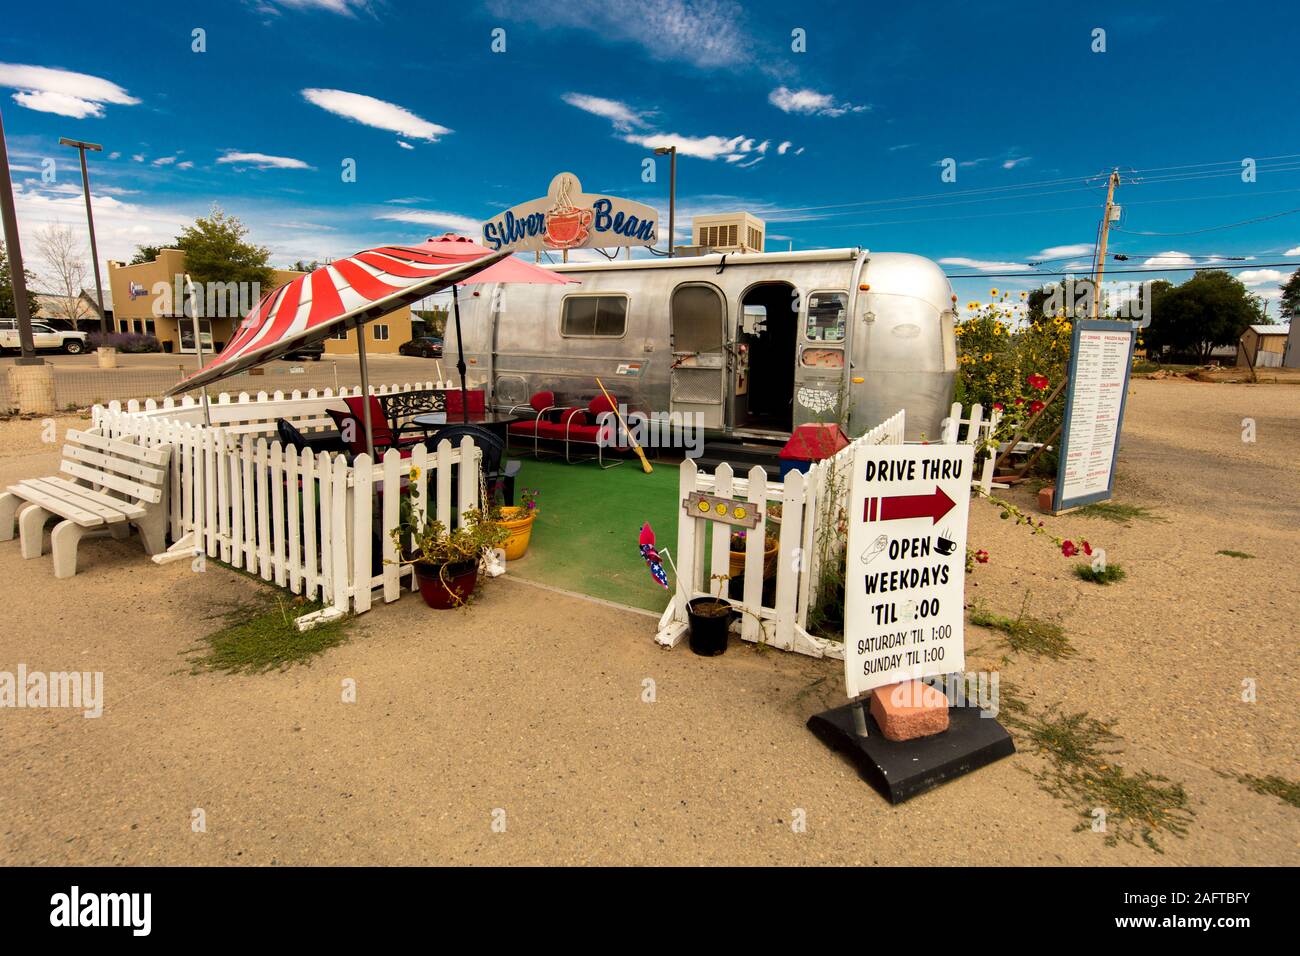 JULY 24, 2019 - OLD ROUTE 66, CORTEZ, COLORADO, USA - Old Route 66 shows old Air Stream Silver Bean Coffee house in Cortez, Colorado Stock Photo